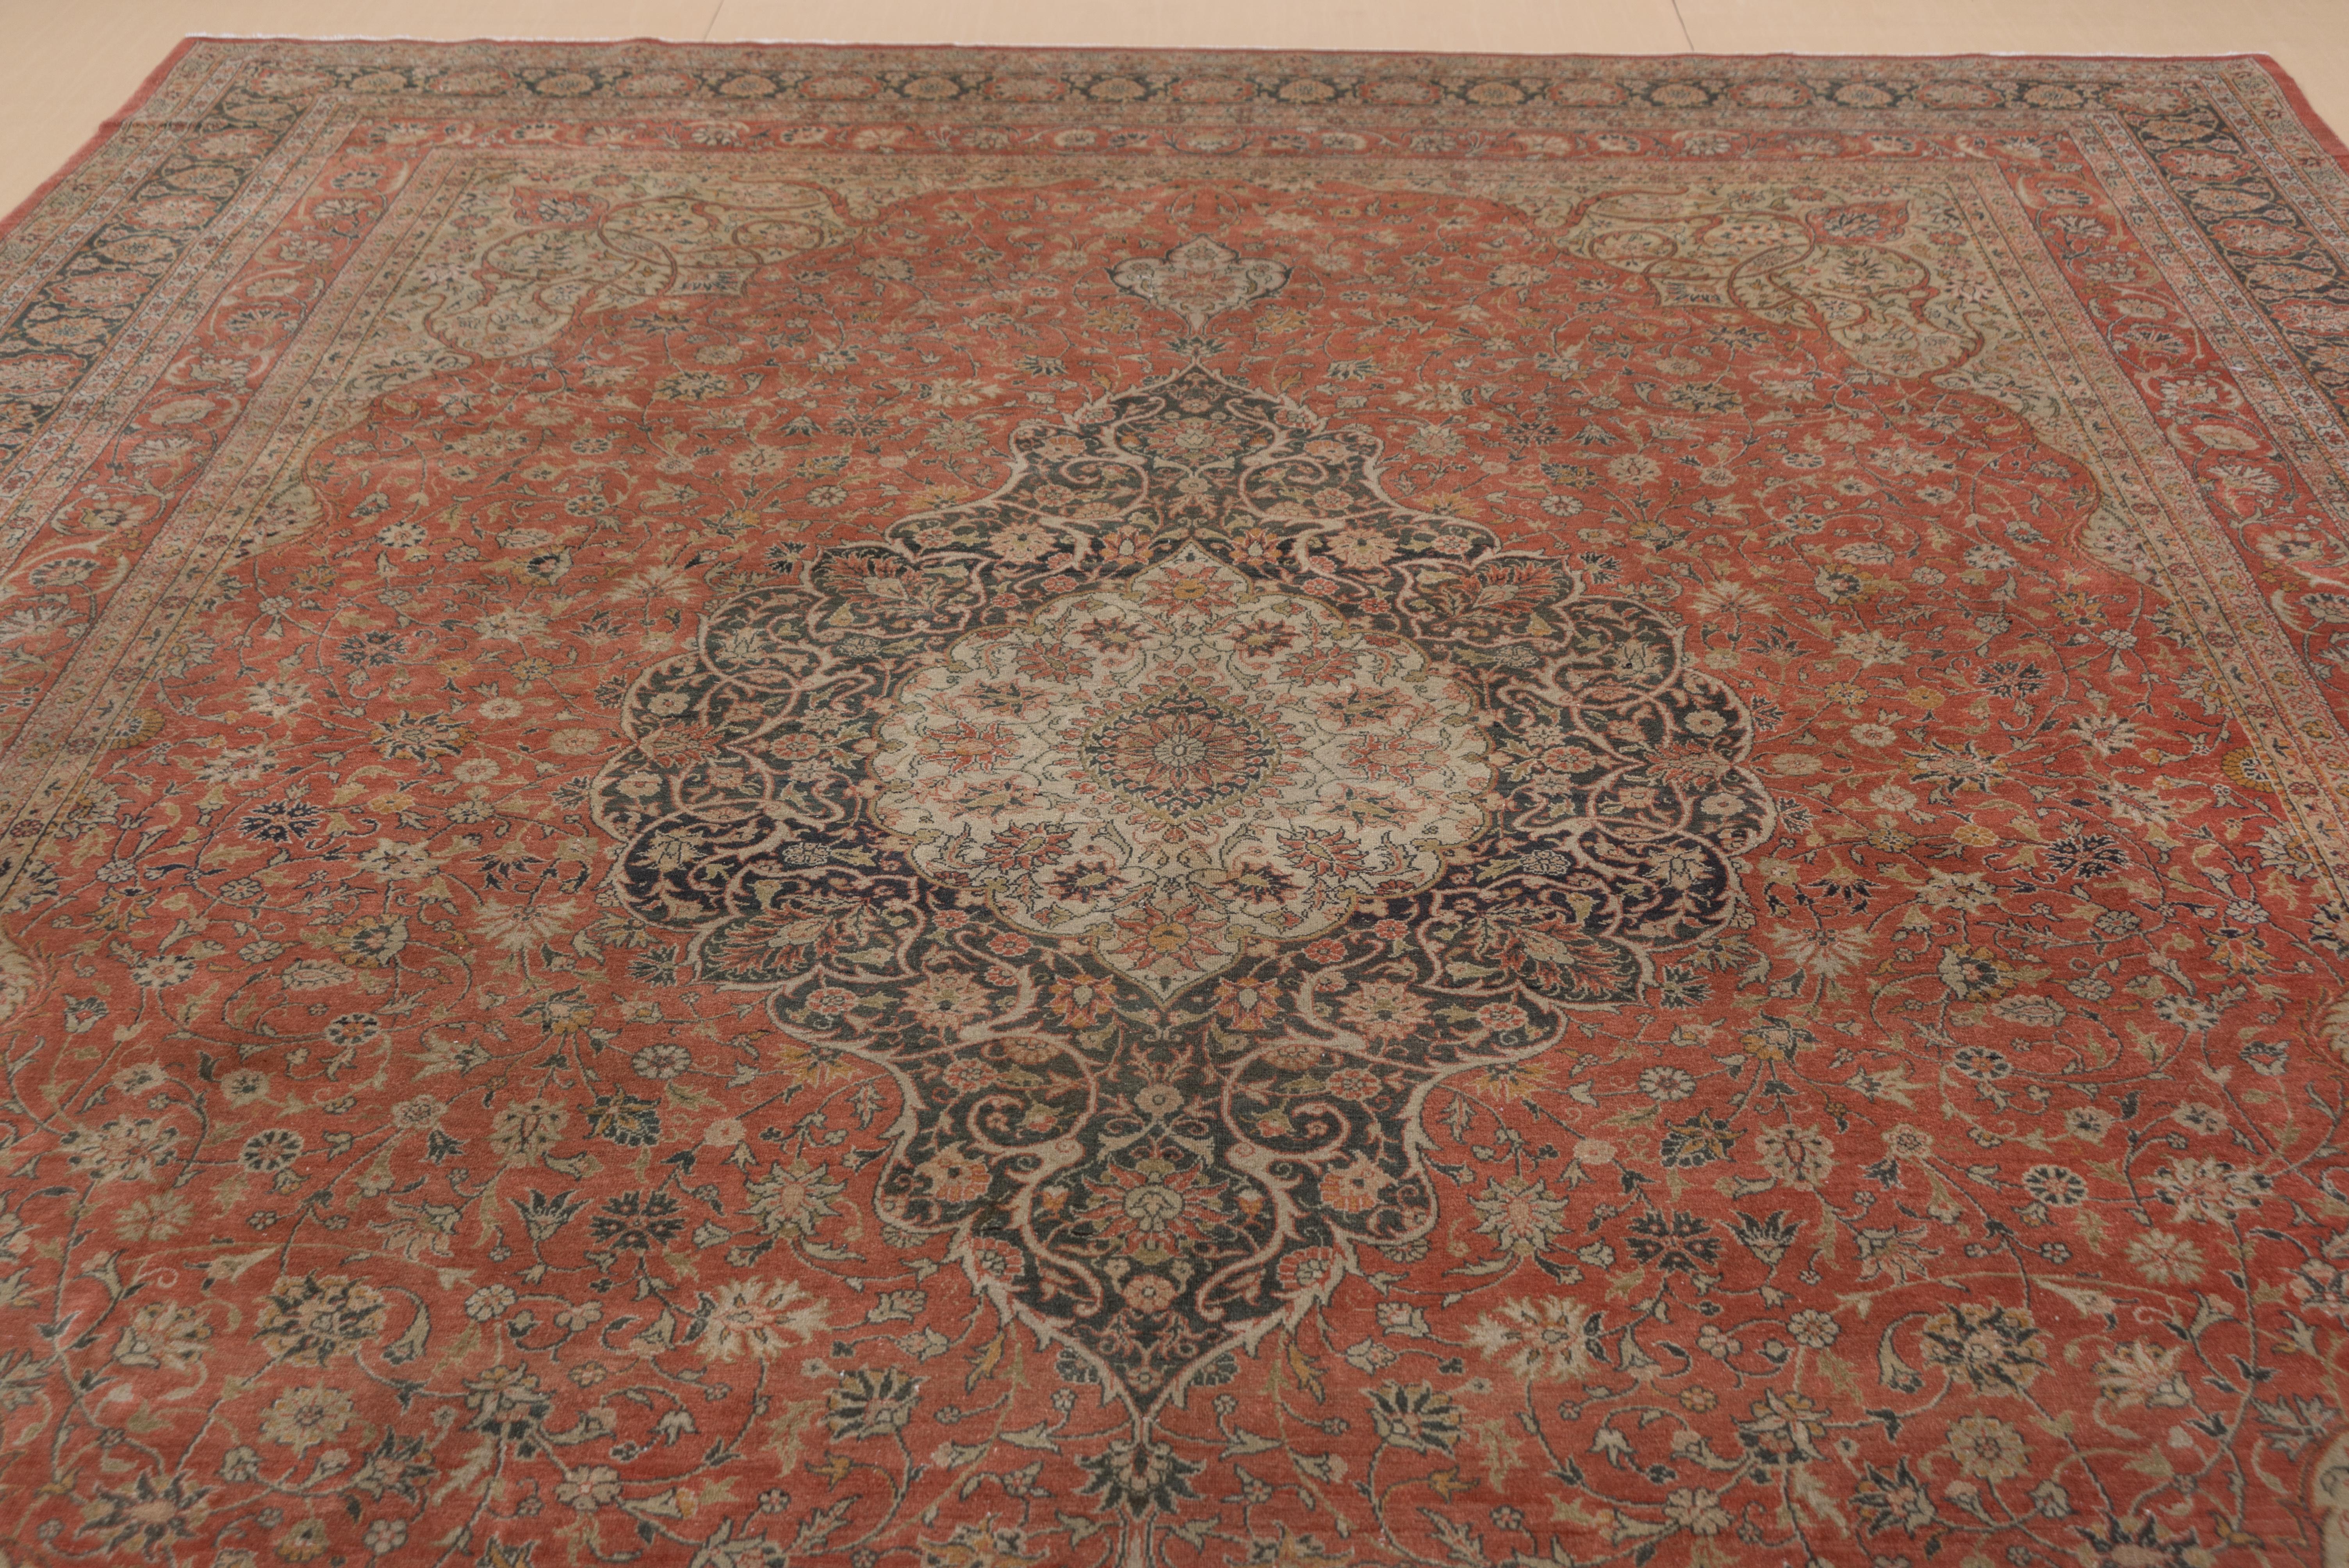 This reasonably finely woven eastern Turkish town carpet is definitely in the Tabriz style with rust, dark brown, cream as the important colors. The salmon-rust shaped field centres a layered umber and ivory arabesque medallion structure while the